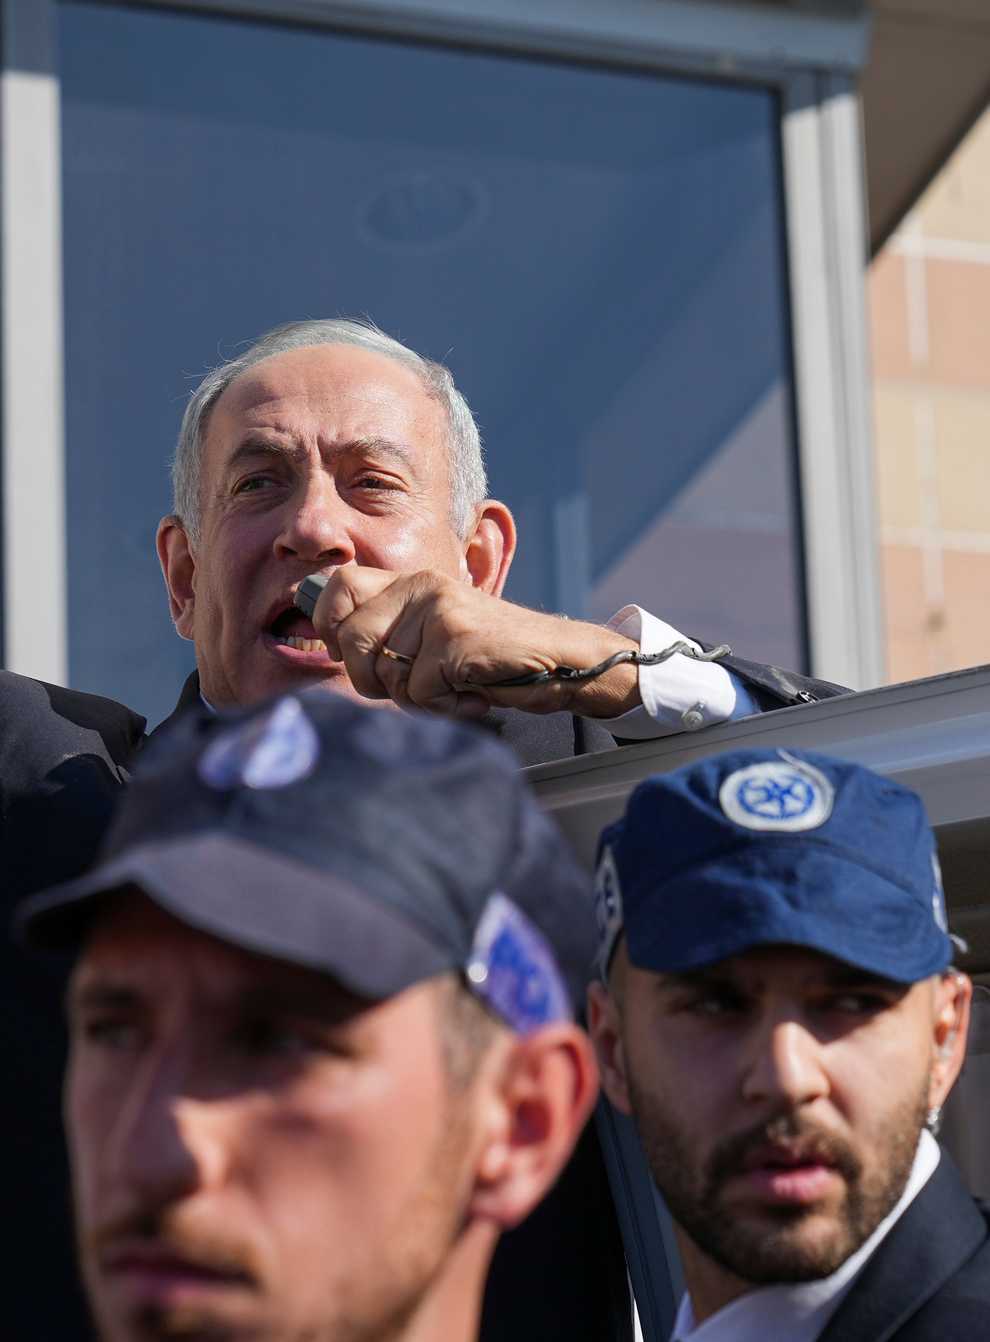 Benjamin Netanyahu, former Israeli Prime Minister and the head of Likud party, waves to his supporters during a national election, in Ashkelon, Israel, Tuesday, Nov. 1, 2022. (AP Photo/Tsafrir Abayov)